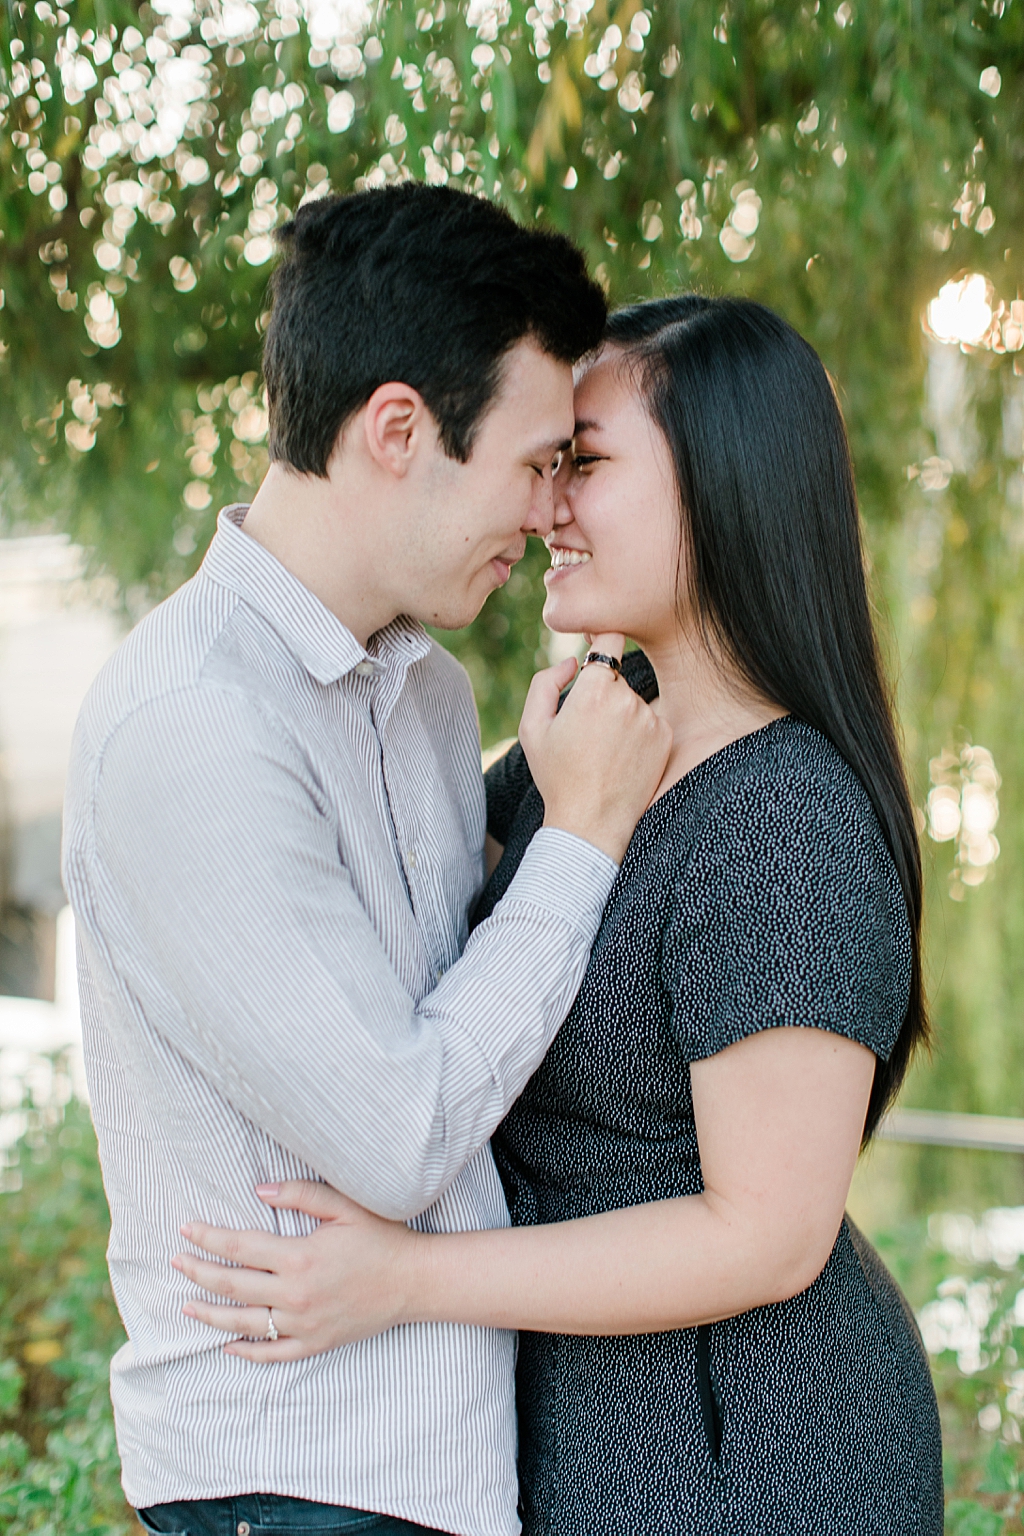 Becky_Collin_Navy_Yards_Park_The_Wharf_Washington_DC_Fall_Engagement_Session_AngelikaJohnsPhotography-7857.jpg